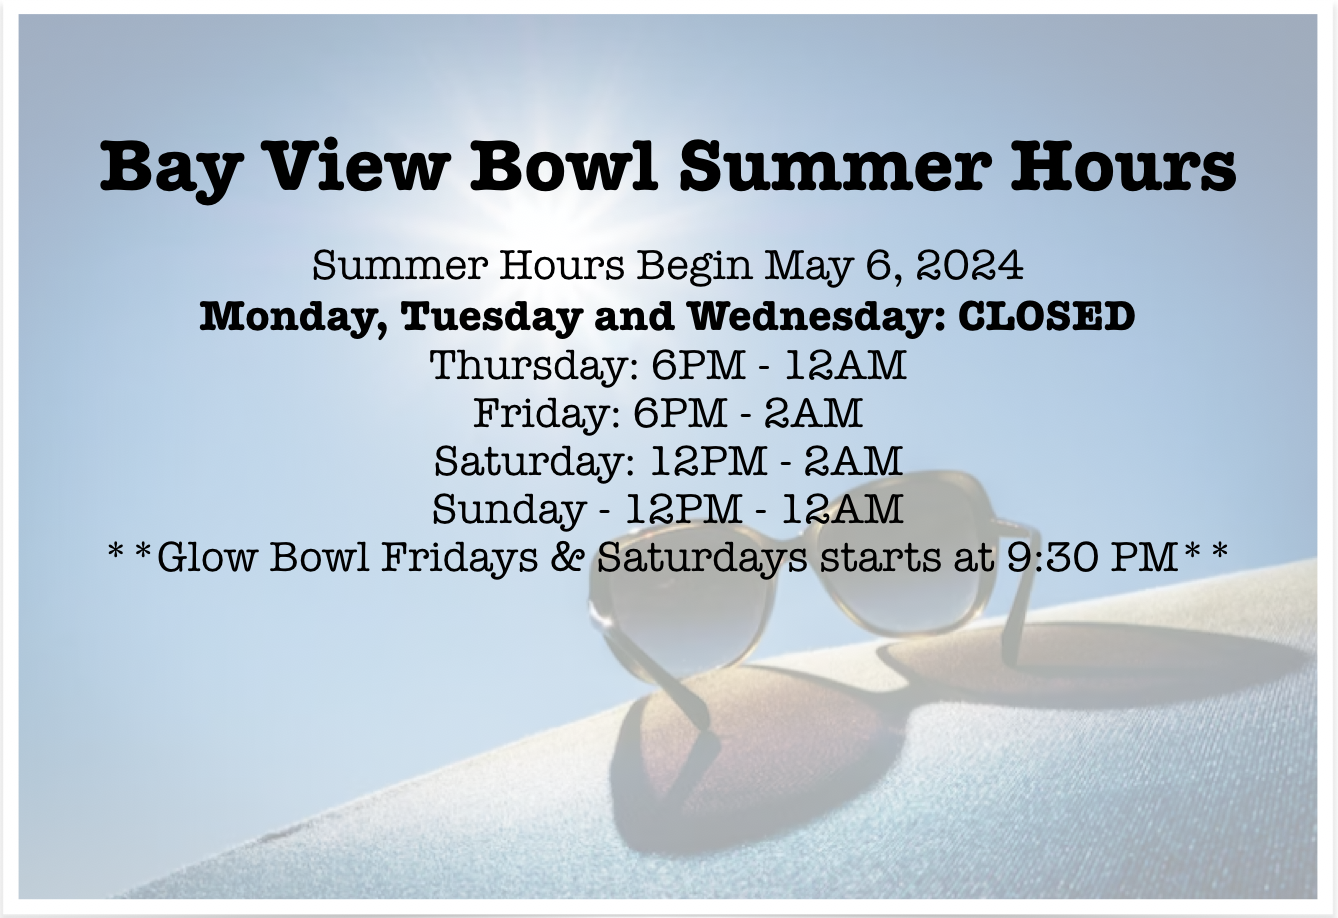 2024 Summer Hours Closed Mon - Wed